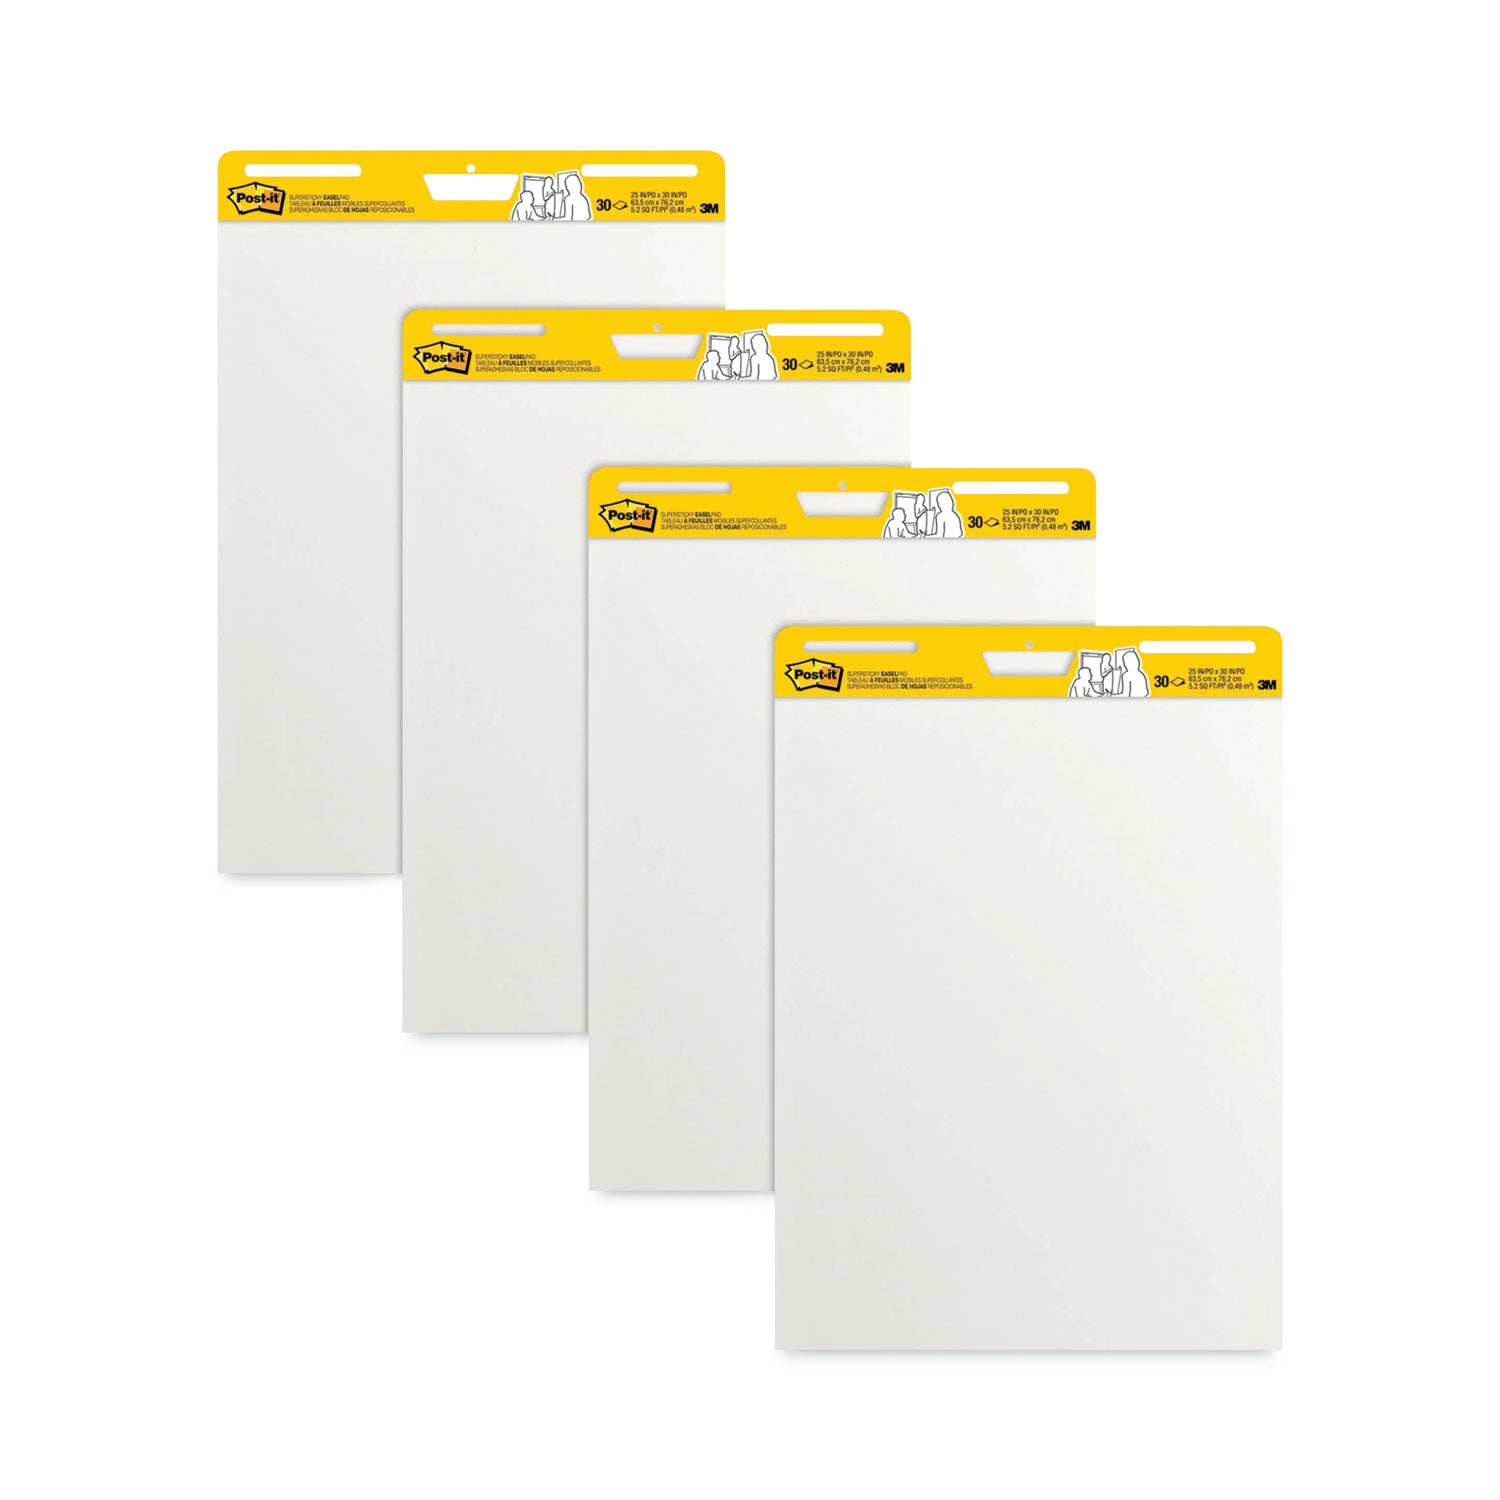 Vertical-Orientation Self-Stick Easel Pad Value Pack, Unruled, 25 x 30, White, 30 Sheets, 4/Carton - 